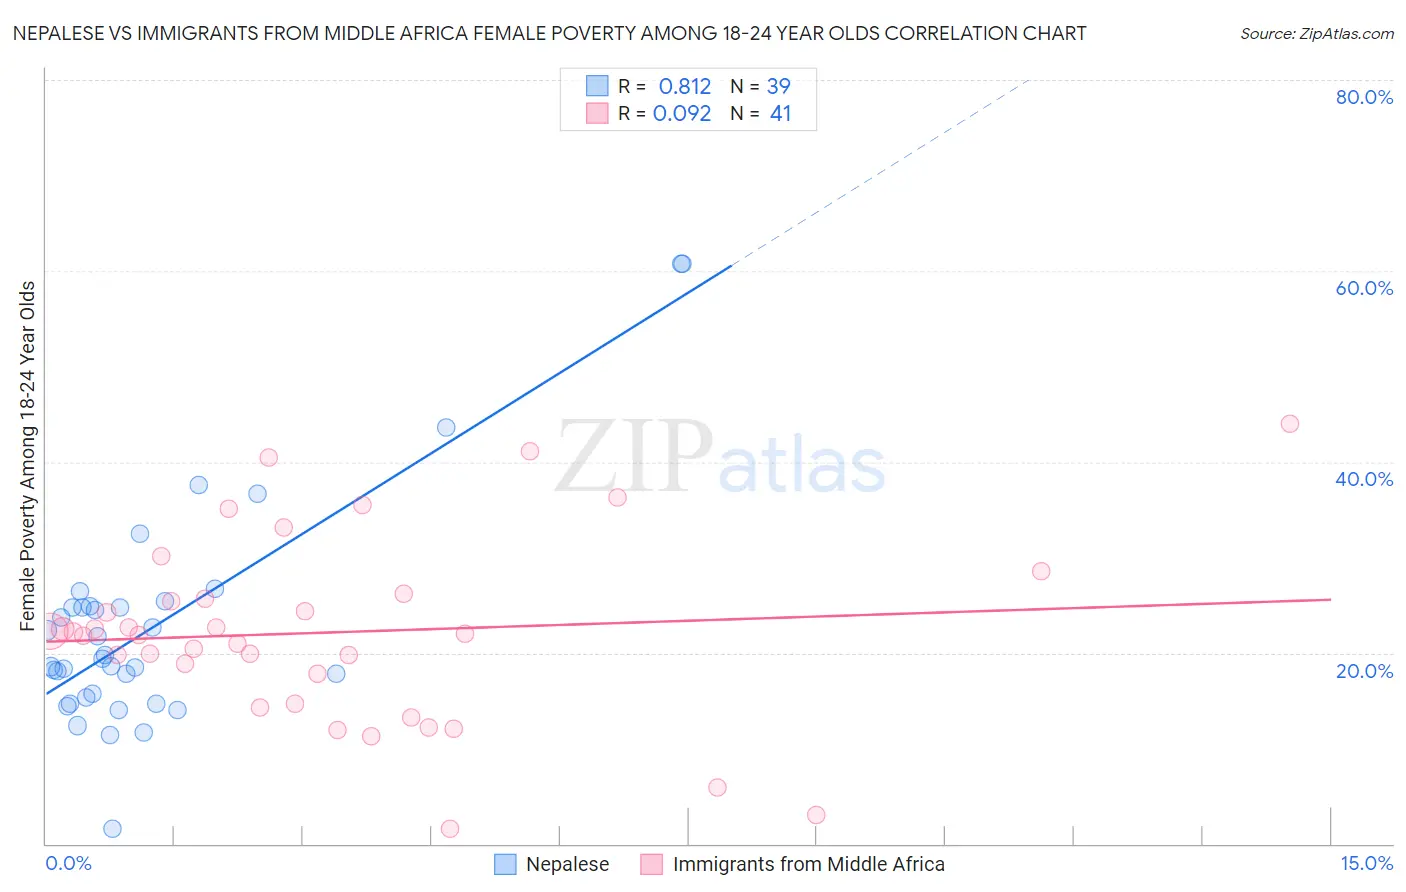 Nepalese vs Immigrants from Middle Africa Female Poverty Among 18-24 Year Olds